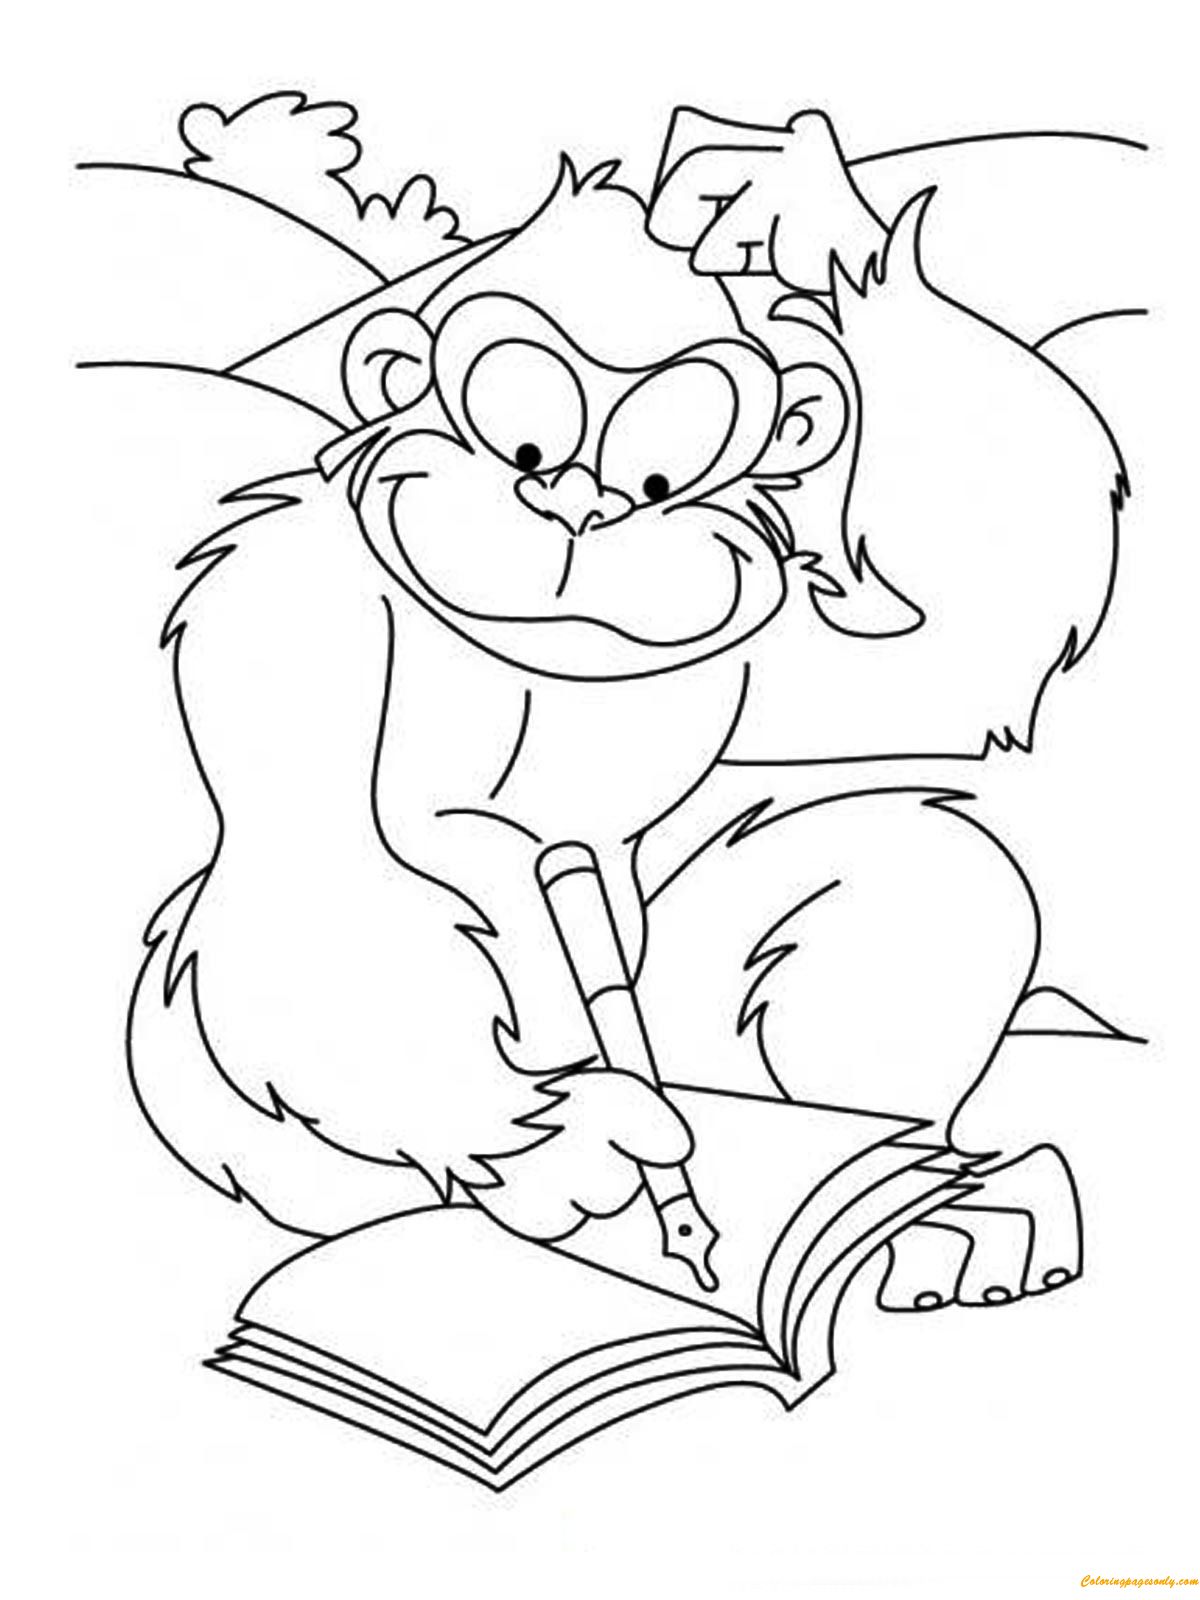 A Cute Monkey Writing Coloring Pages